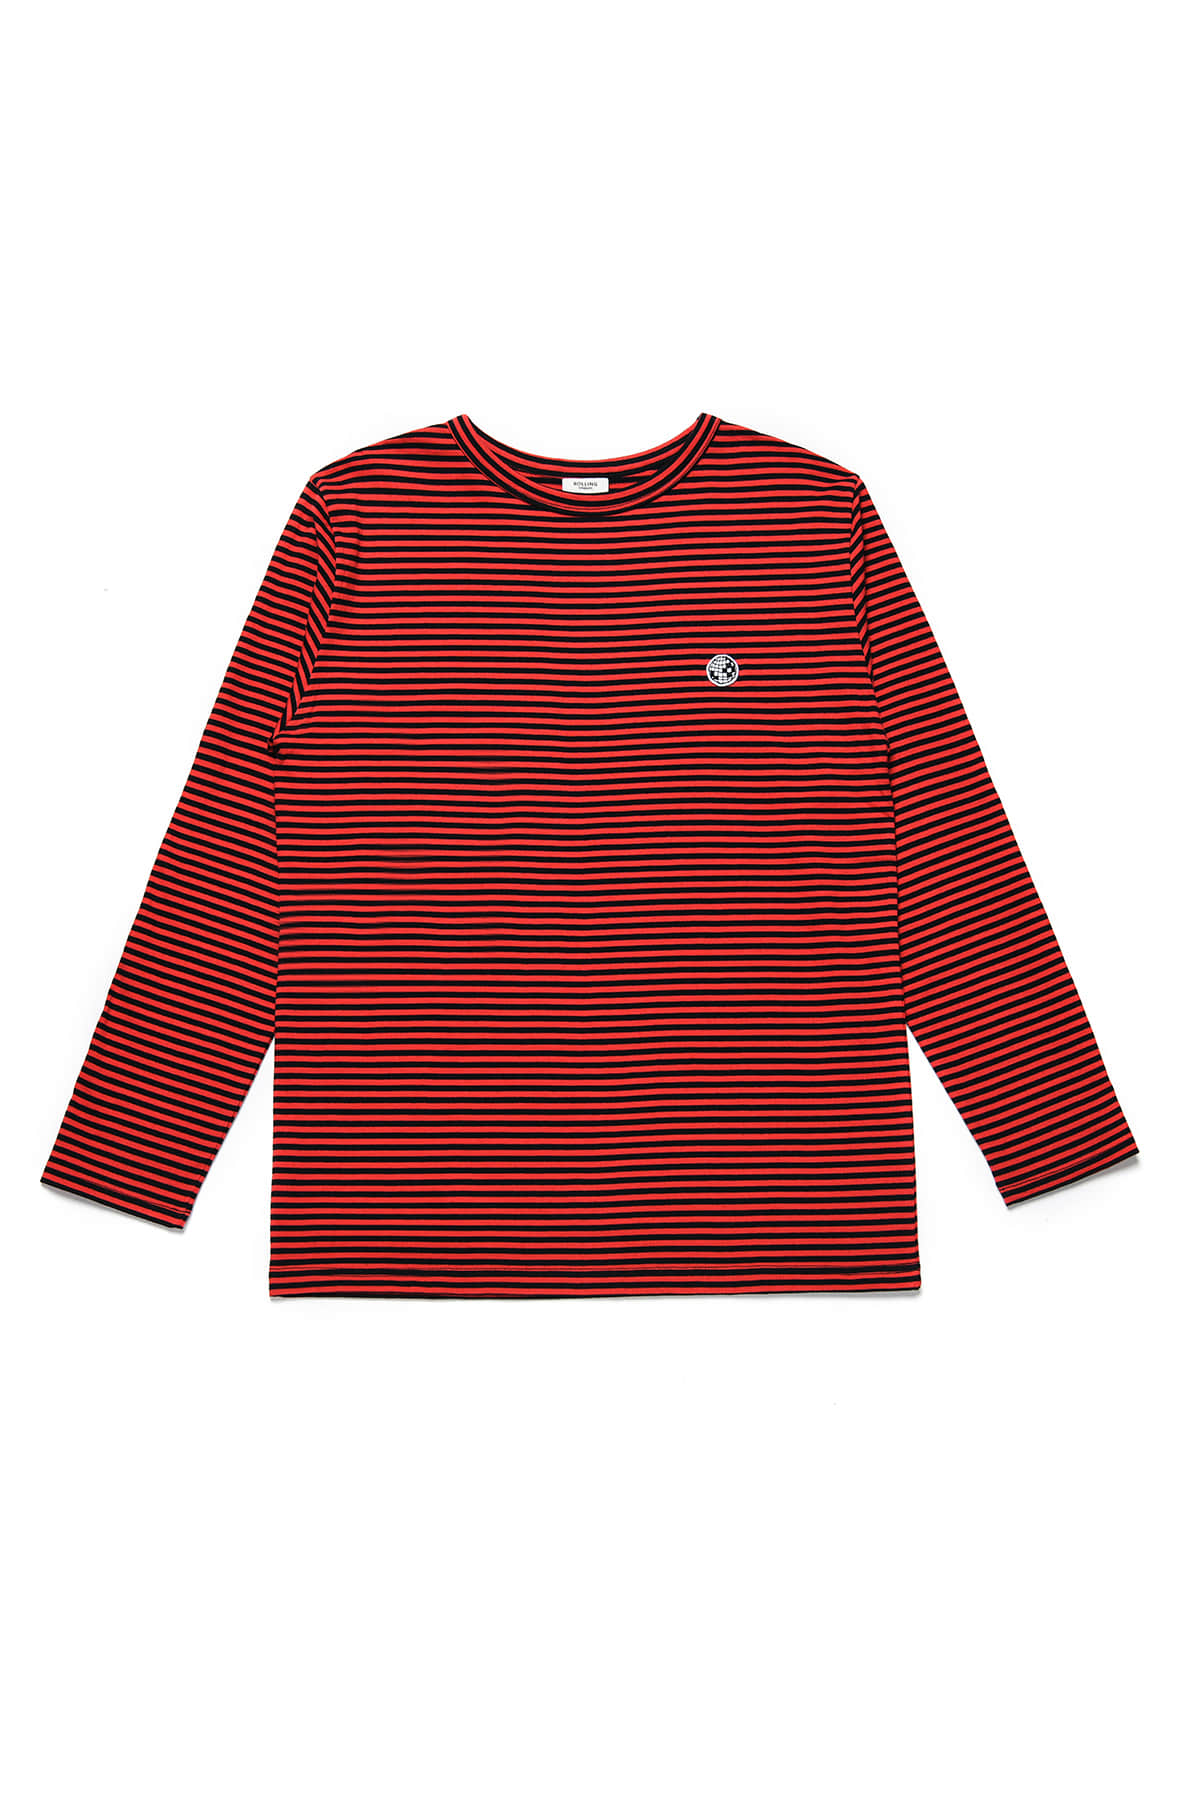 CLASSIC STRIPED MIRRORBALL EMBROIDERED T-SHIRT BLACK/RED